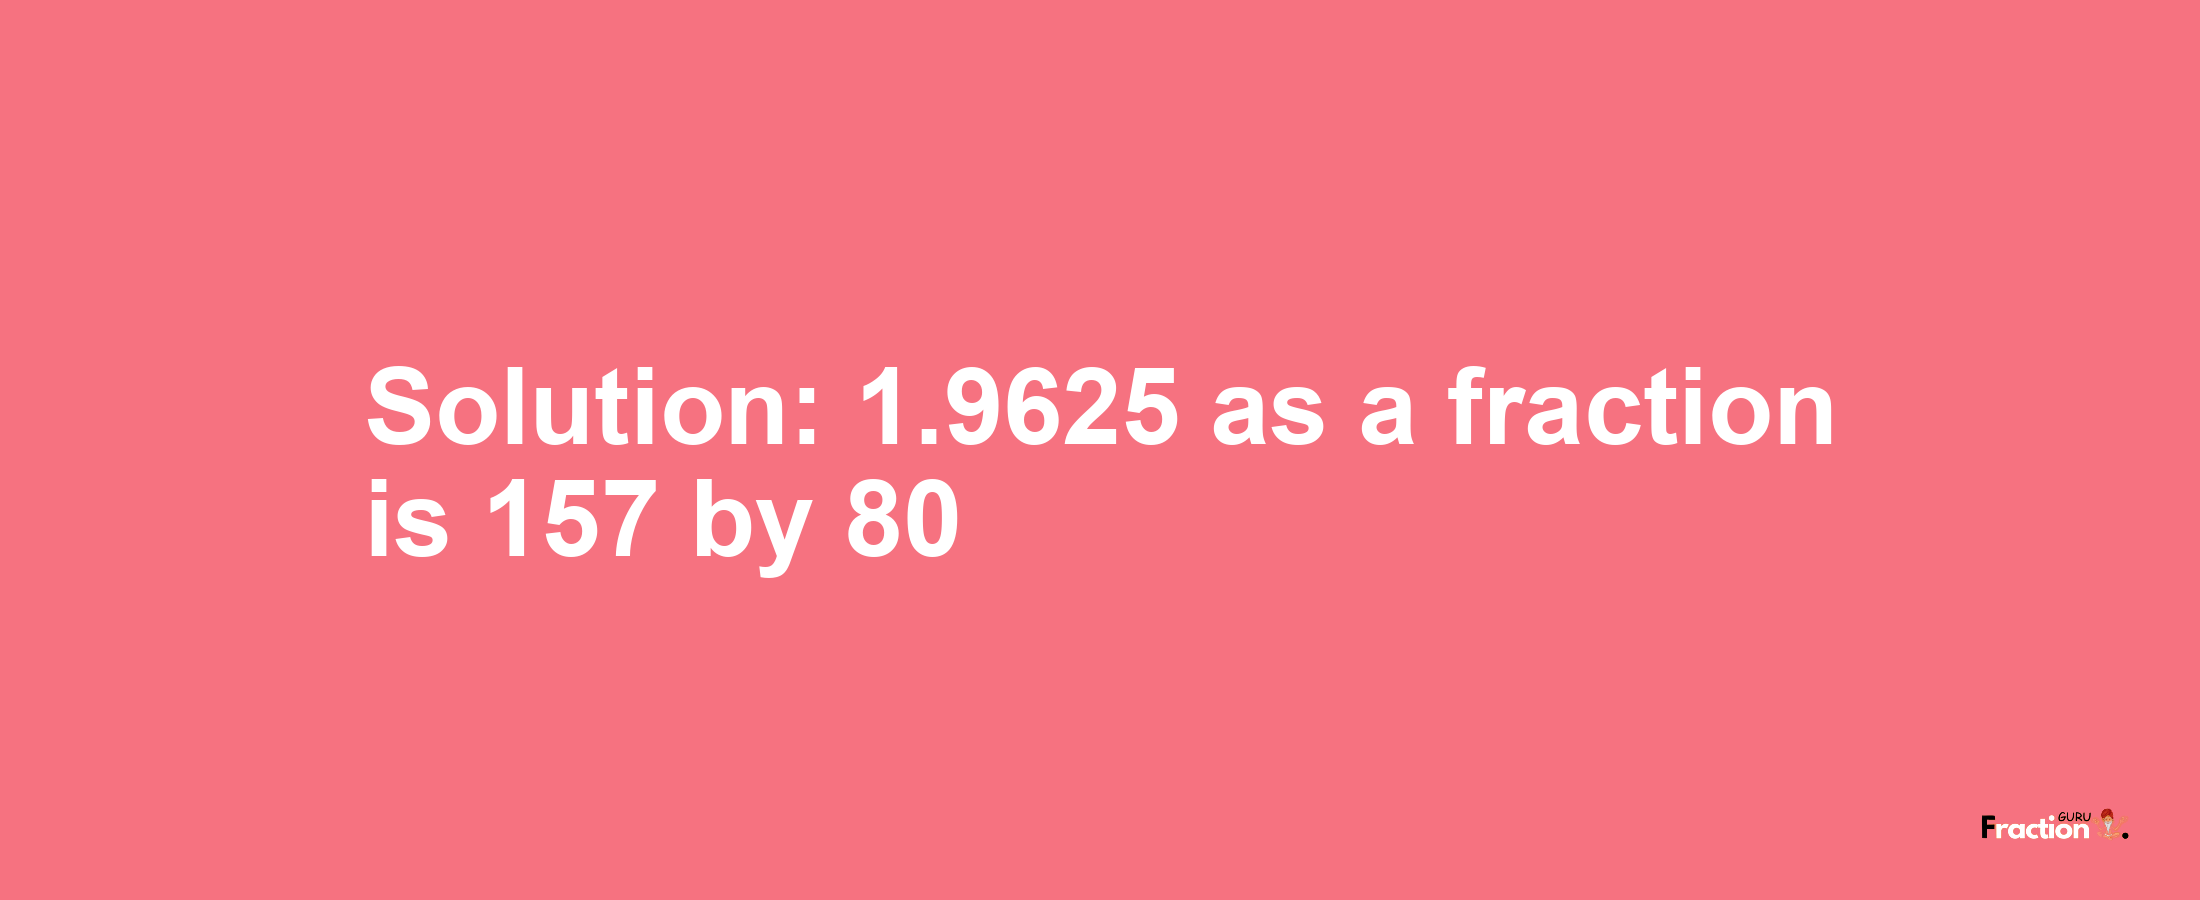 Solution:1.9625 as a fraction is 157/80